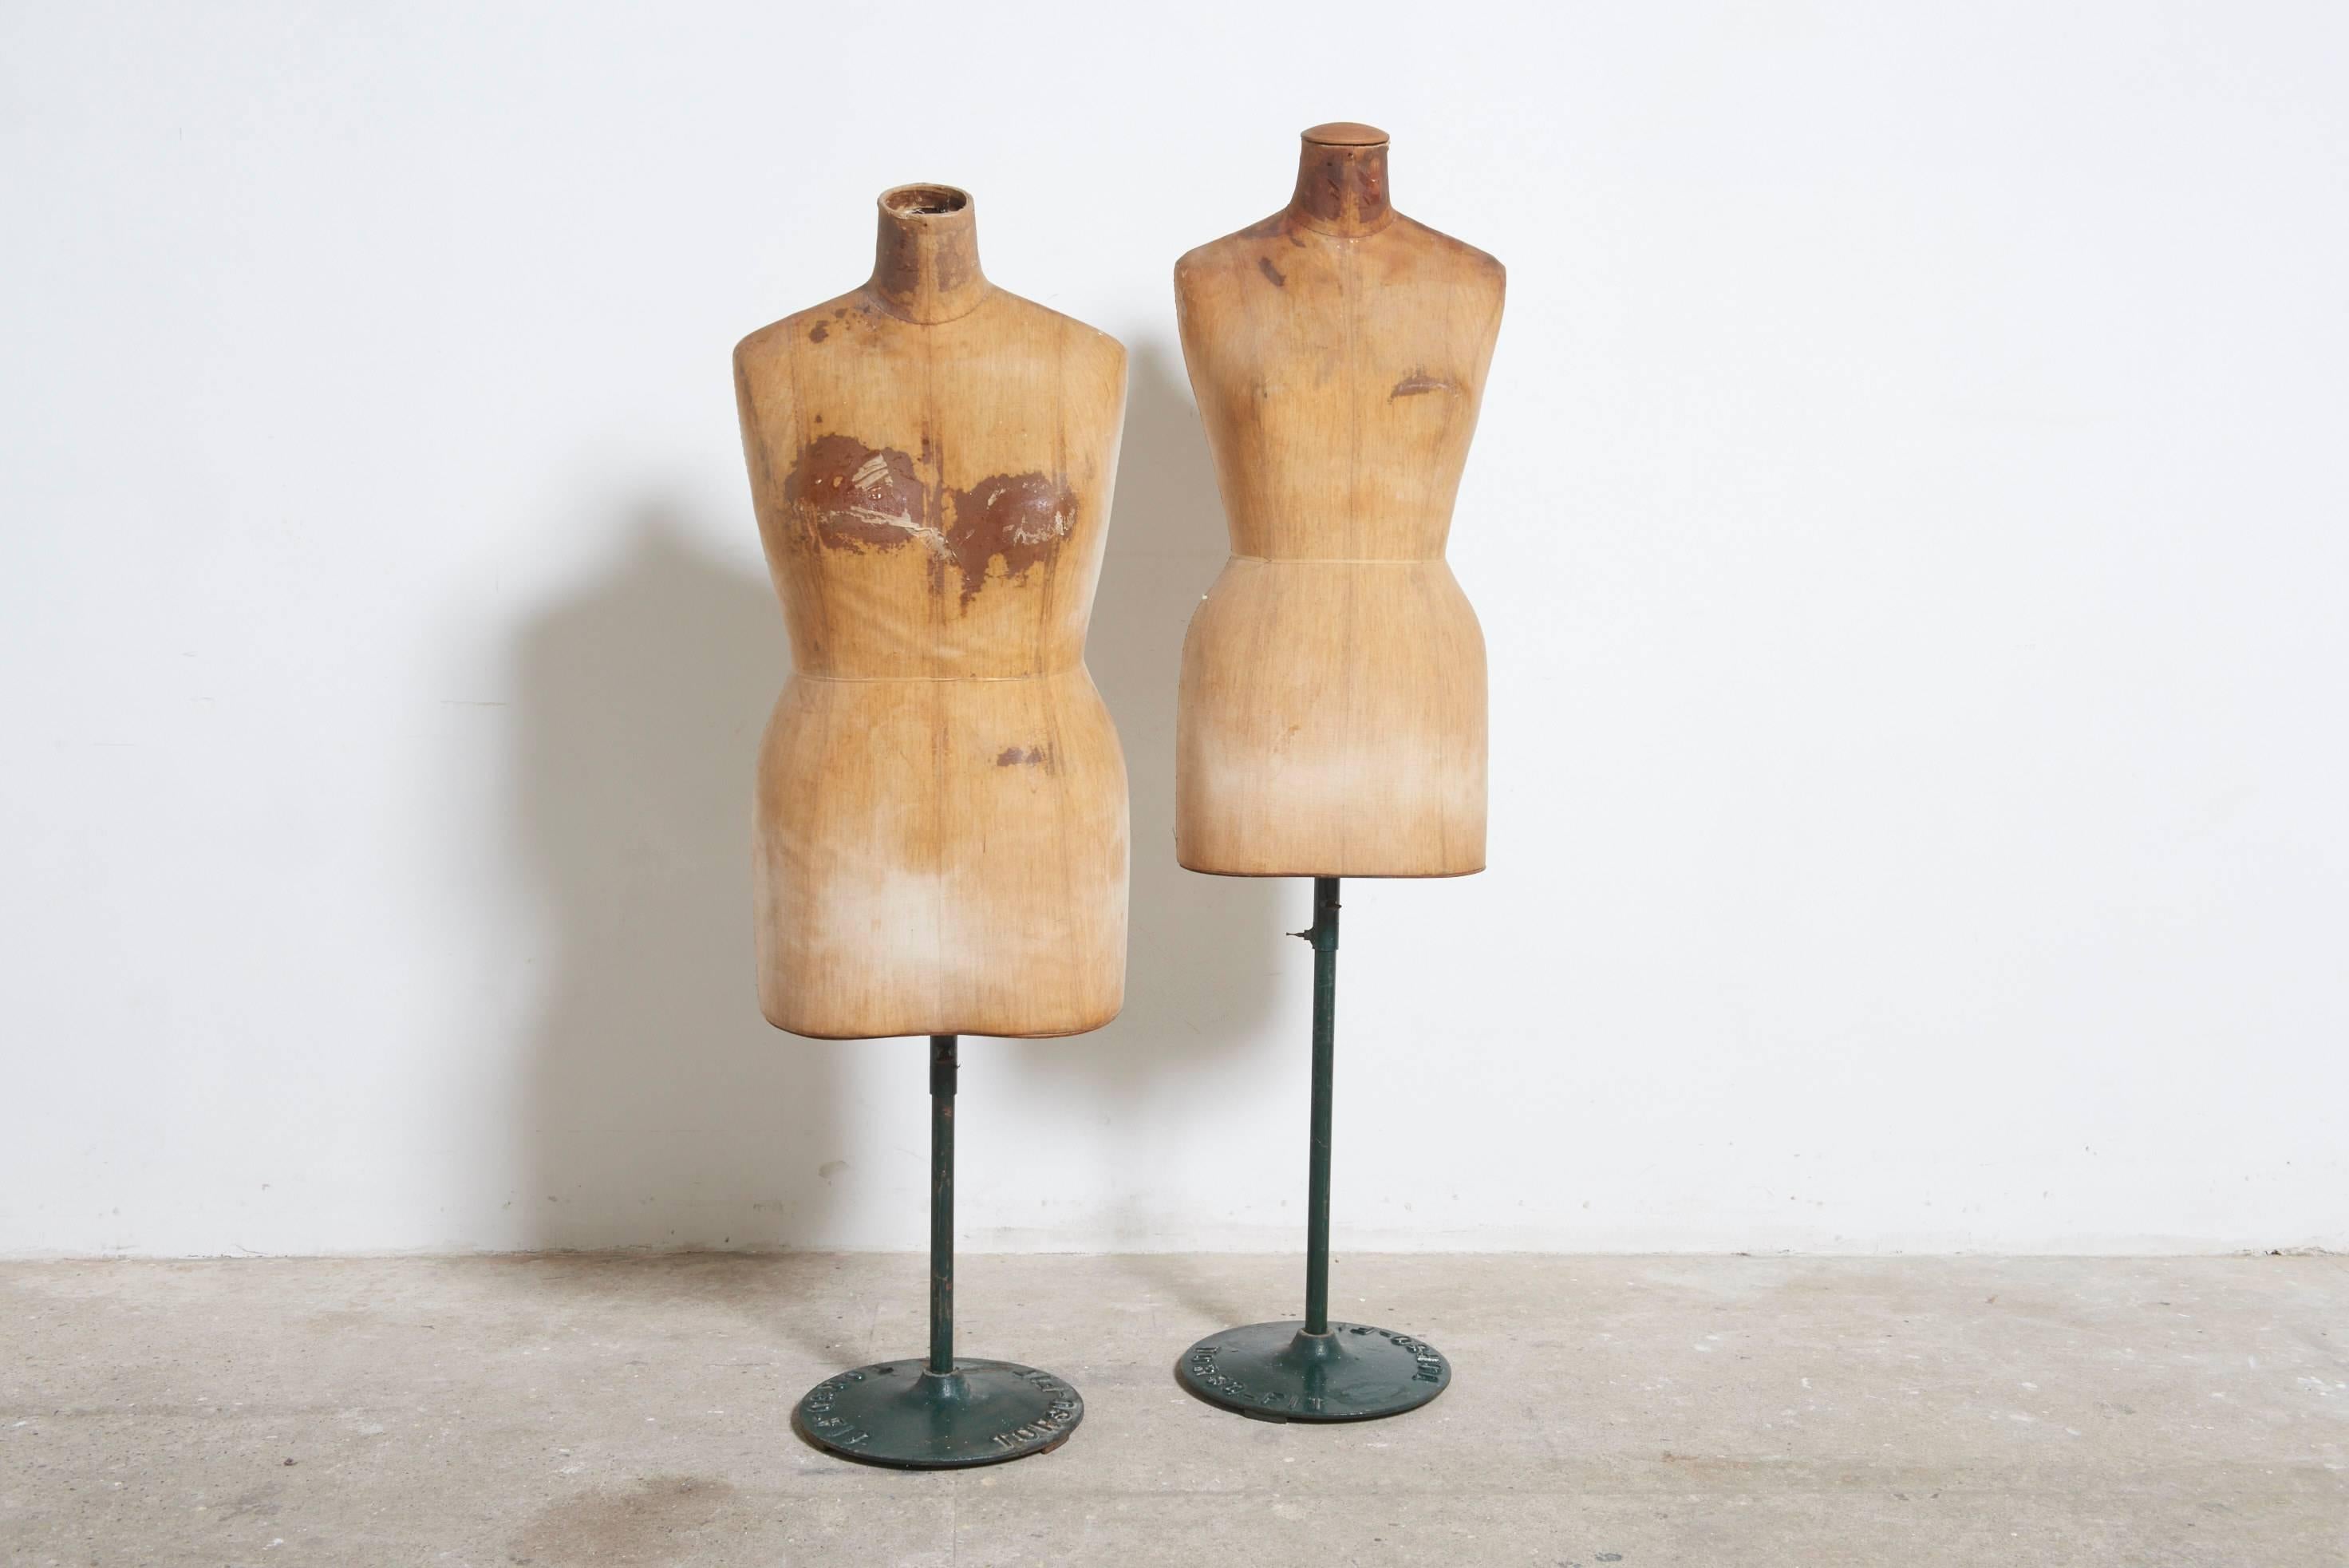 These dressmaker mannequins are raised on a cylindrical lacquered green metal pedestal. 

Whether used for the creation and alteration of garments, draped fabrics pinned in to the torso to become a dress, blouse, or tuxedo it also makes for a